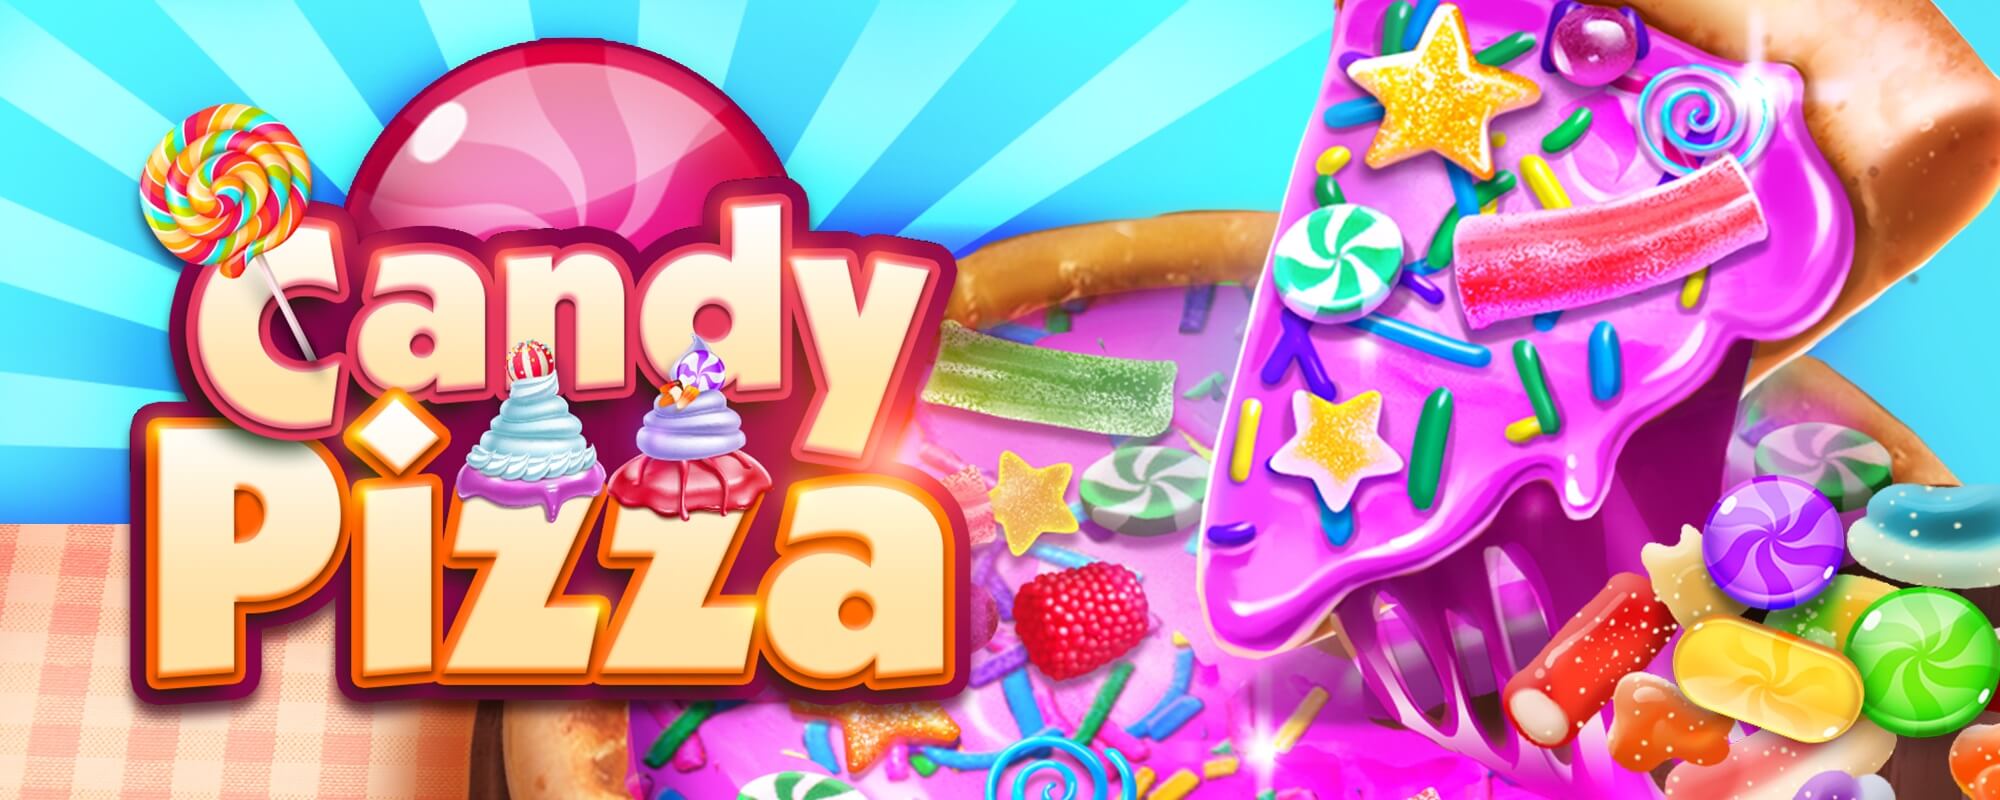 Candy Pizza Maker